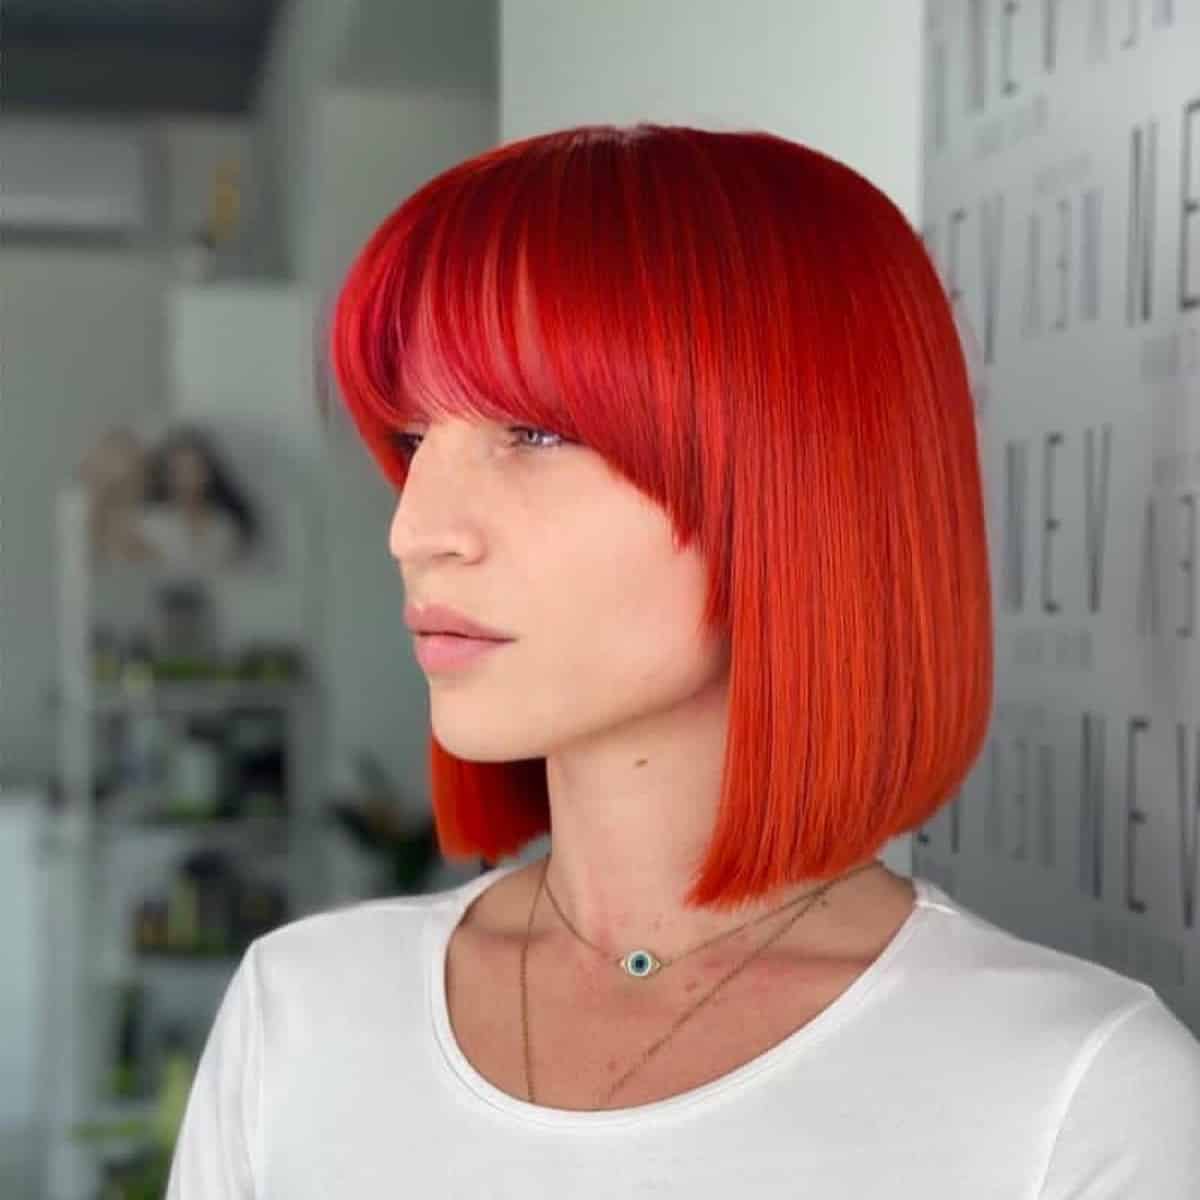 These 17 Blunt Cut Bob Haircuts at Totally Trending Right Now